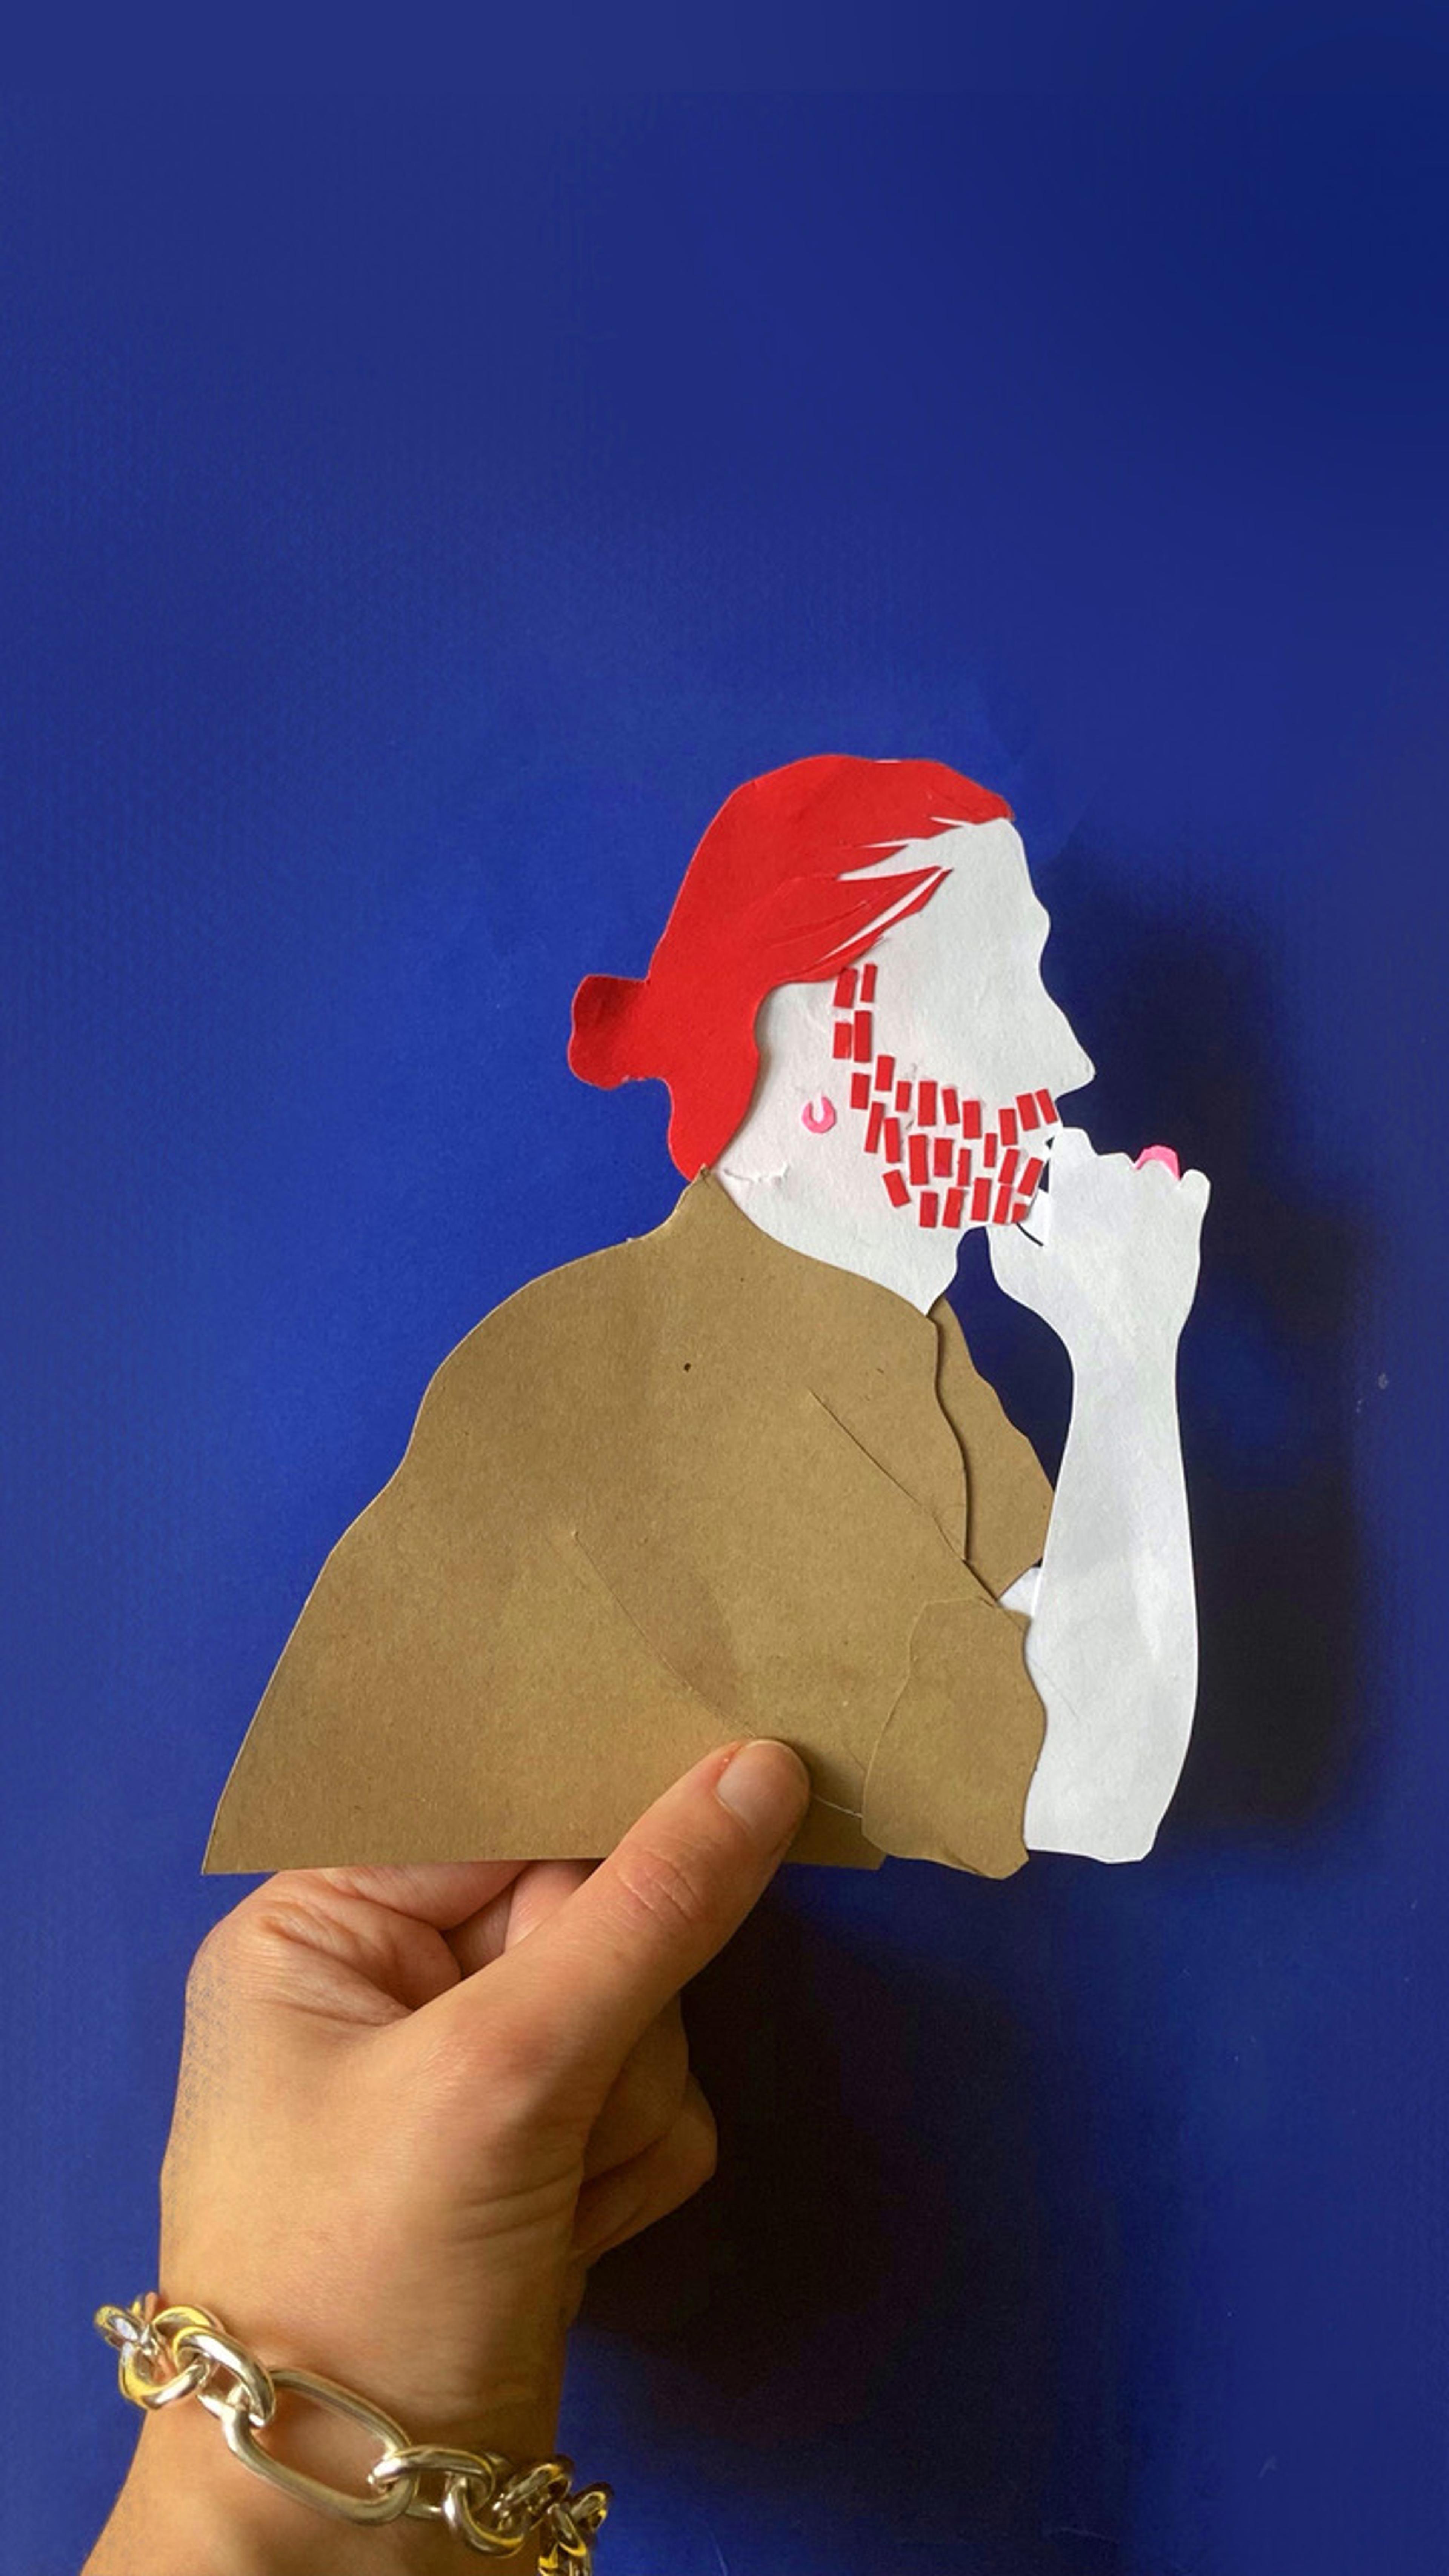 Photograph of a hand holding a paper cut out illustration of a person from the side with their hands under their chin.